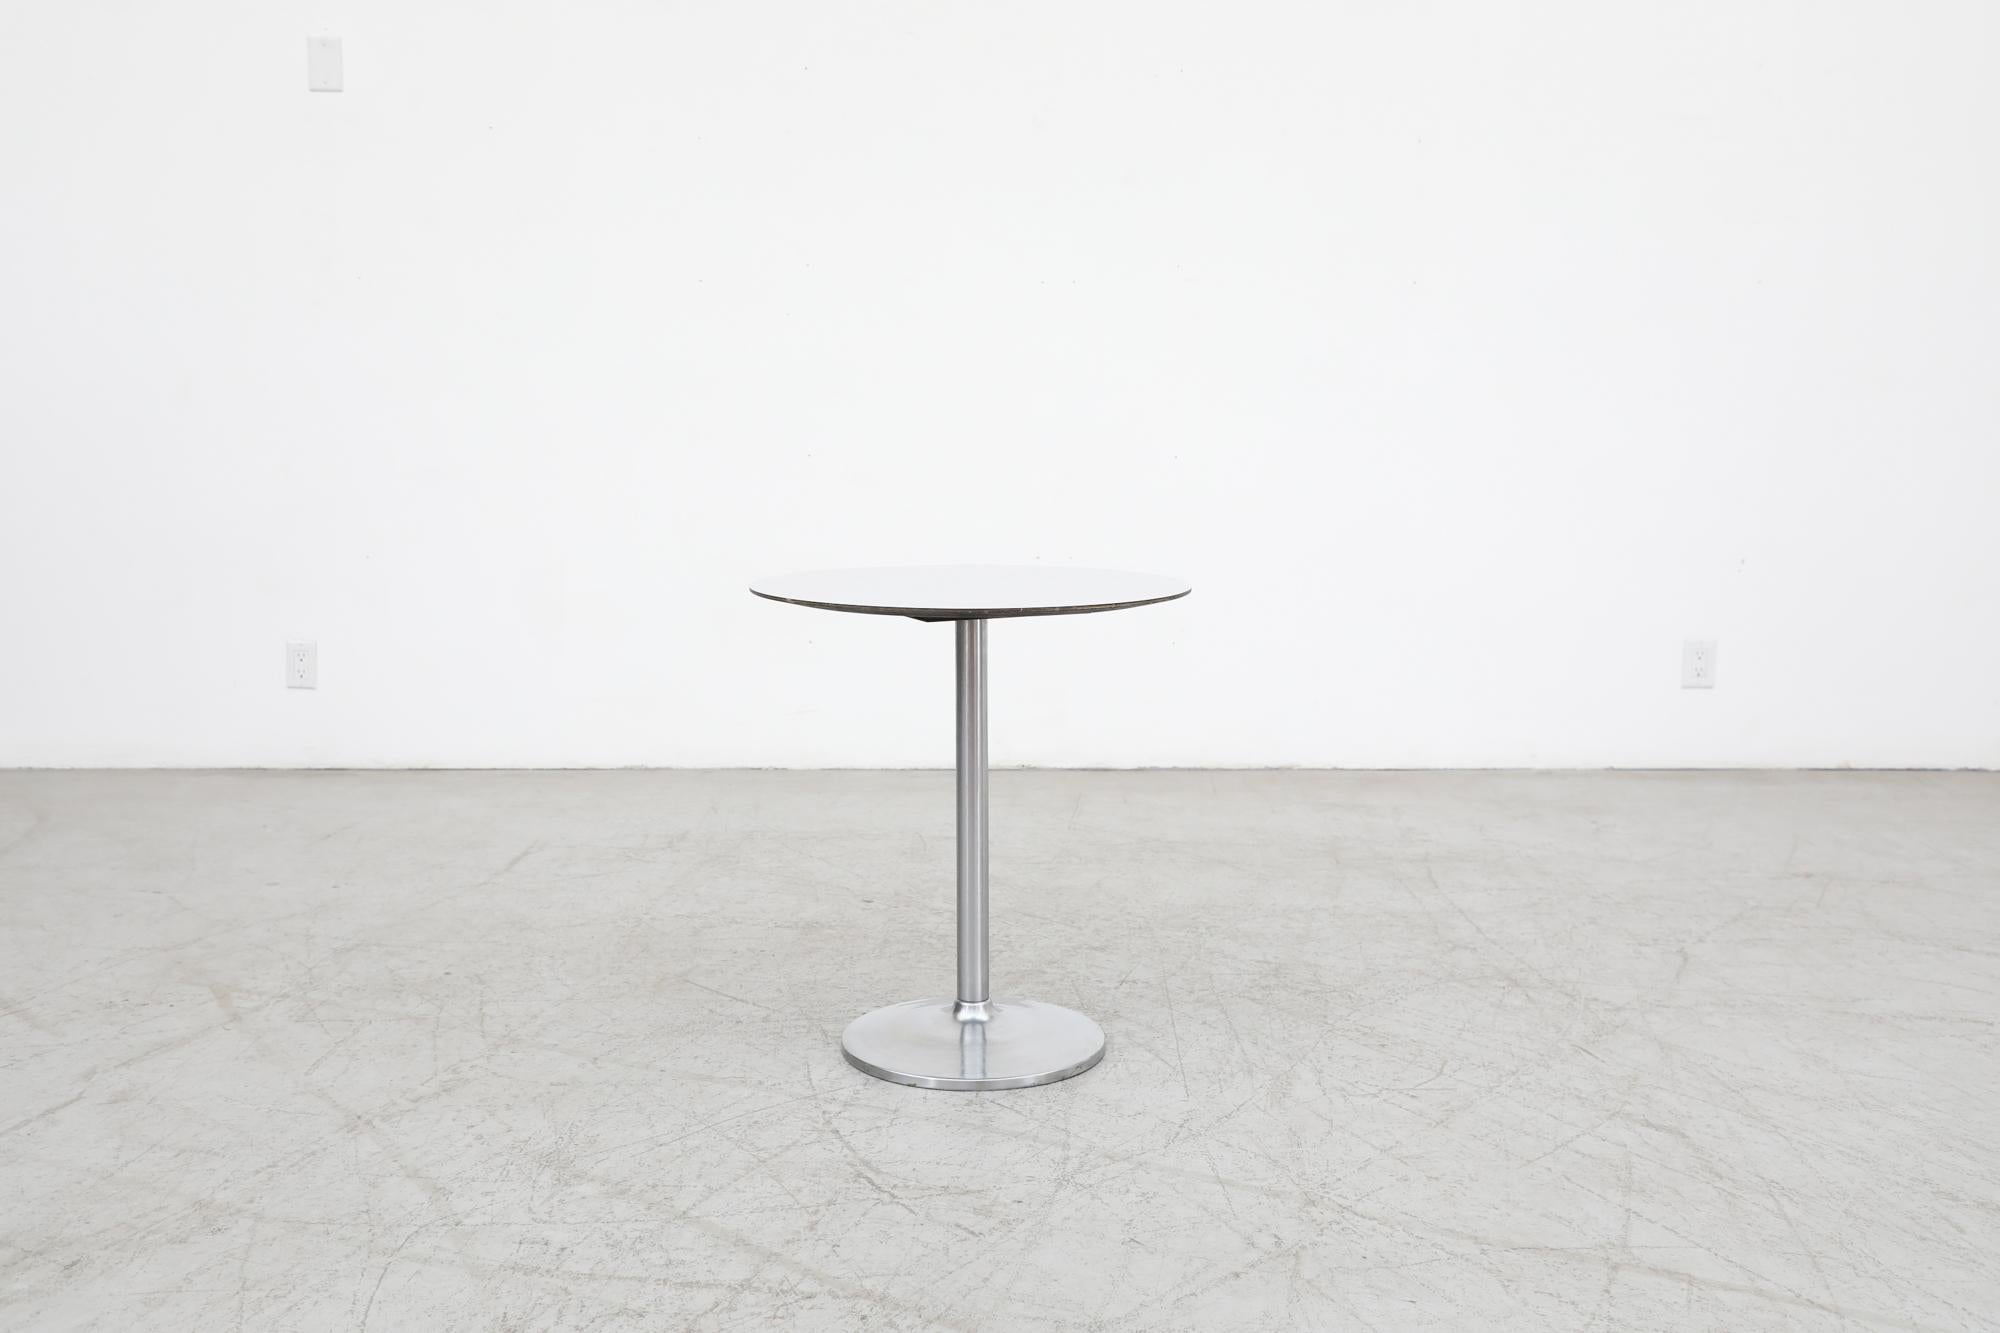 Dutch Mid-Century pedestal side table with attractively sleek steel base and a gray laminate plywood top. Reminiscent of the work of Eero Saarinen. The table is in original condition with some visible signs of wear consistent with its age and use.